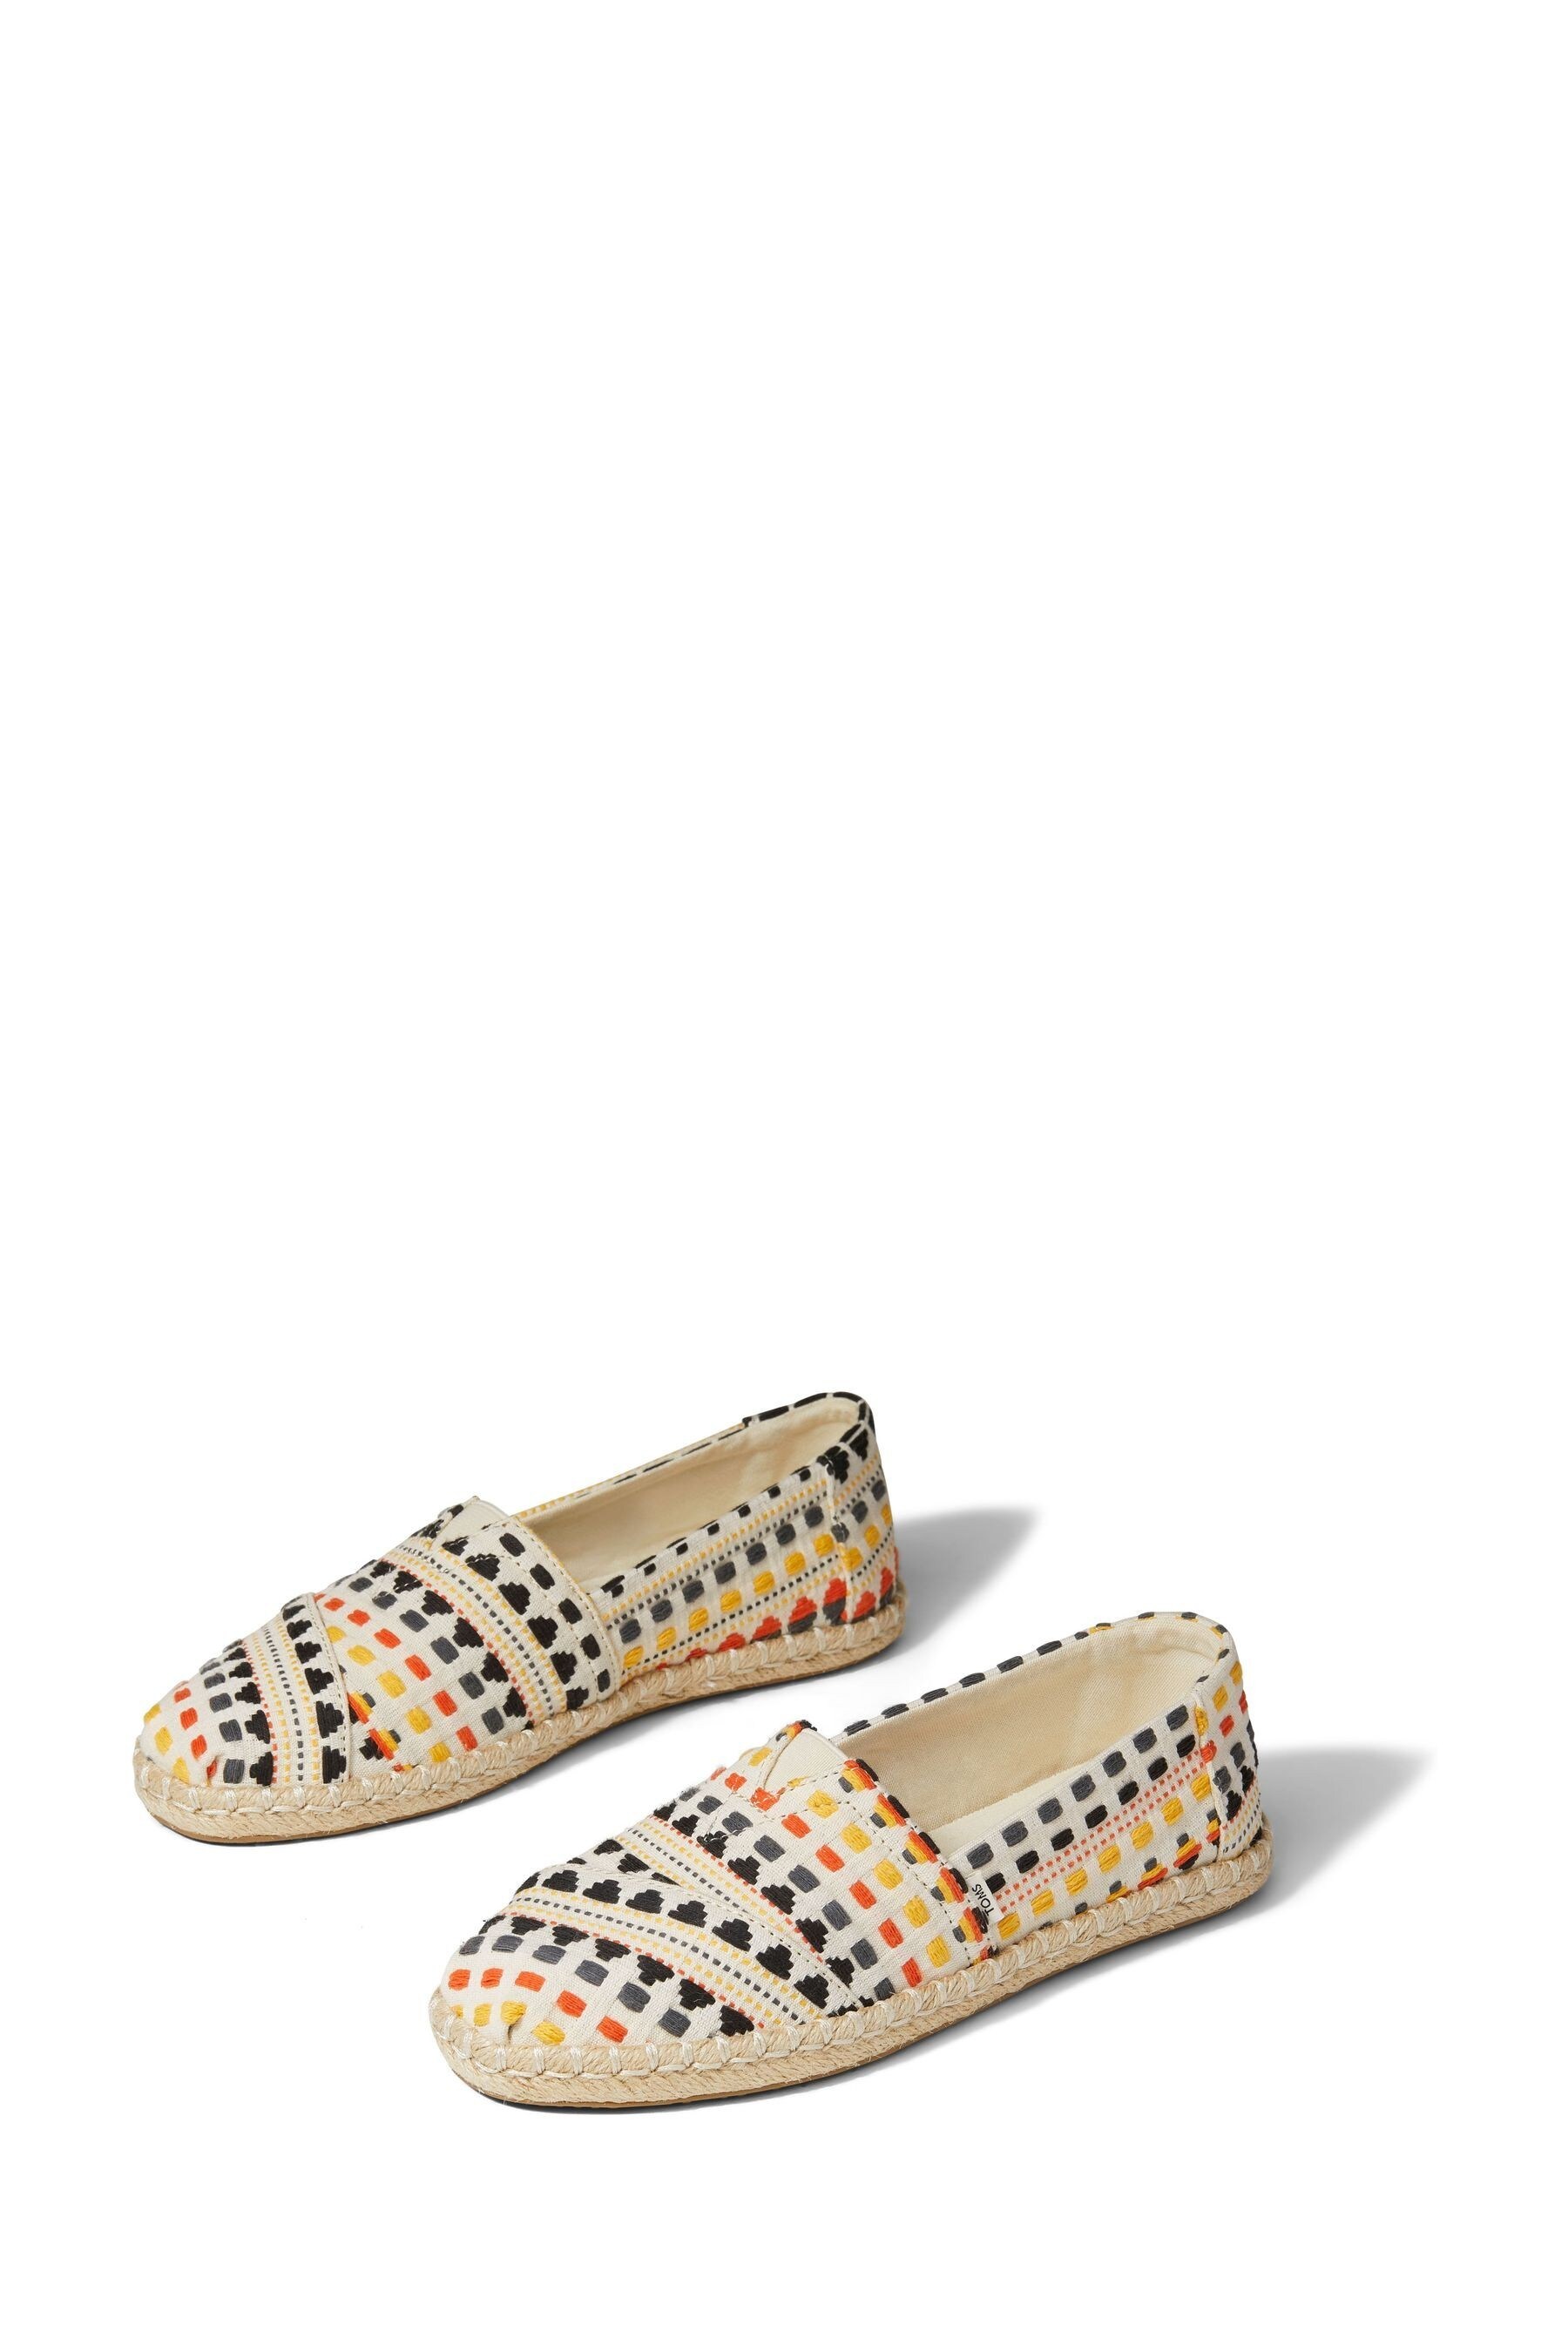 Buy TOMS Woven Rope Espadrille Shoes from the Next UK ...